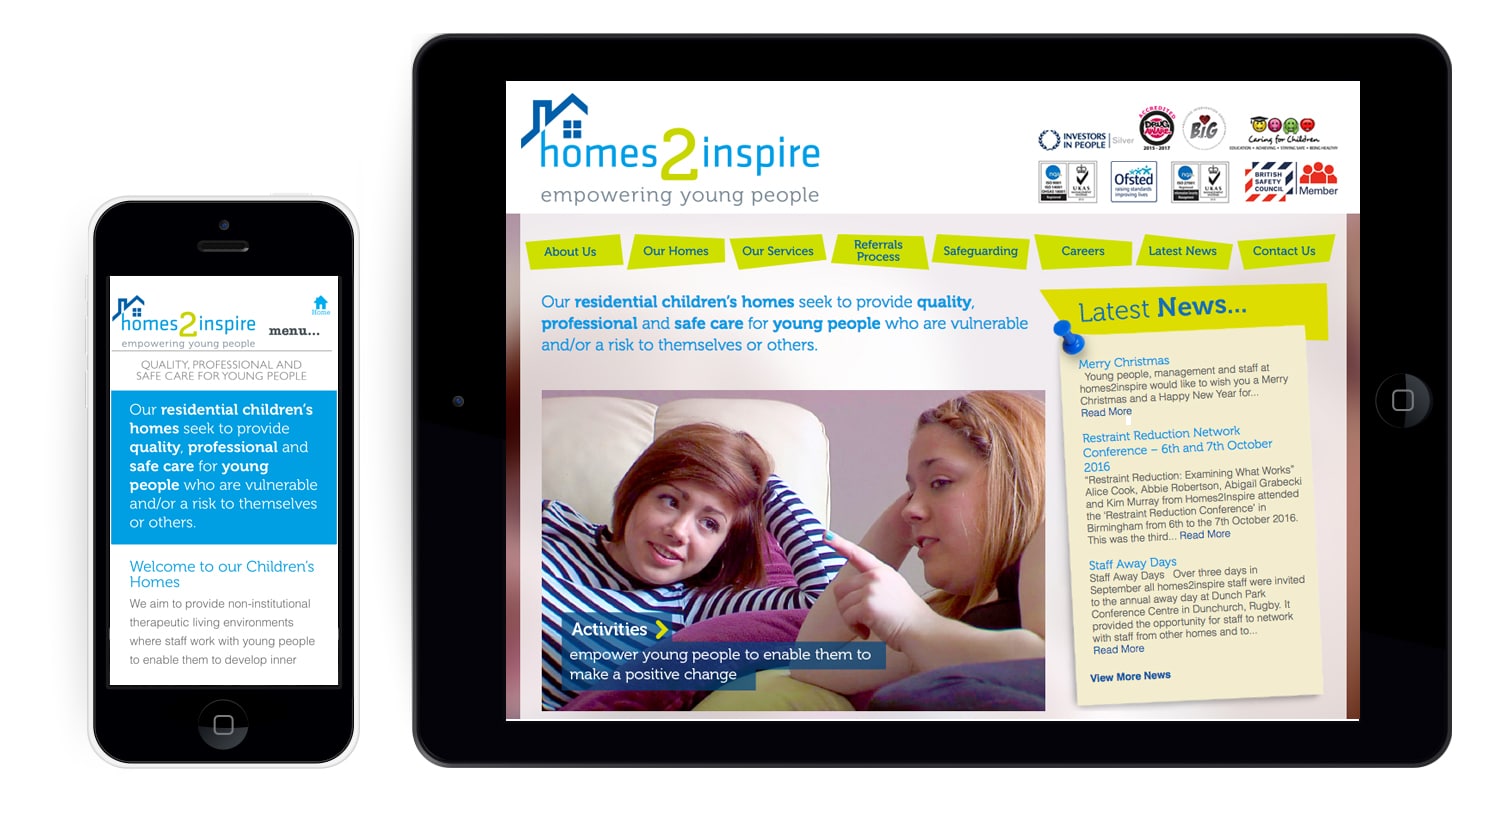 Homes 2 inspire website tablet and phone layout